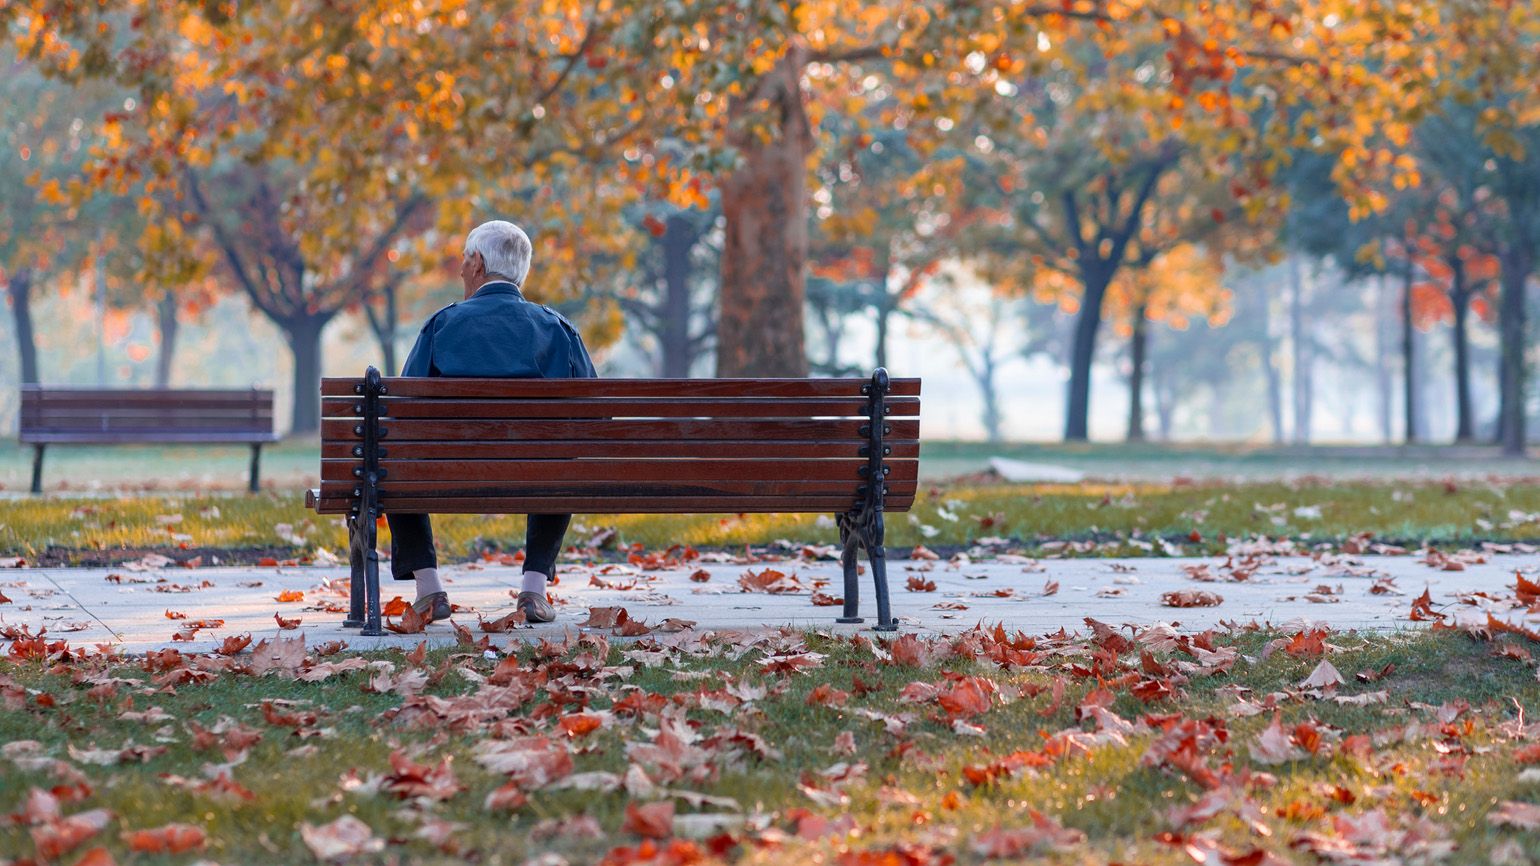 Senior citizen man sitting alone on a bench during Autumn season; Getty Images